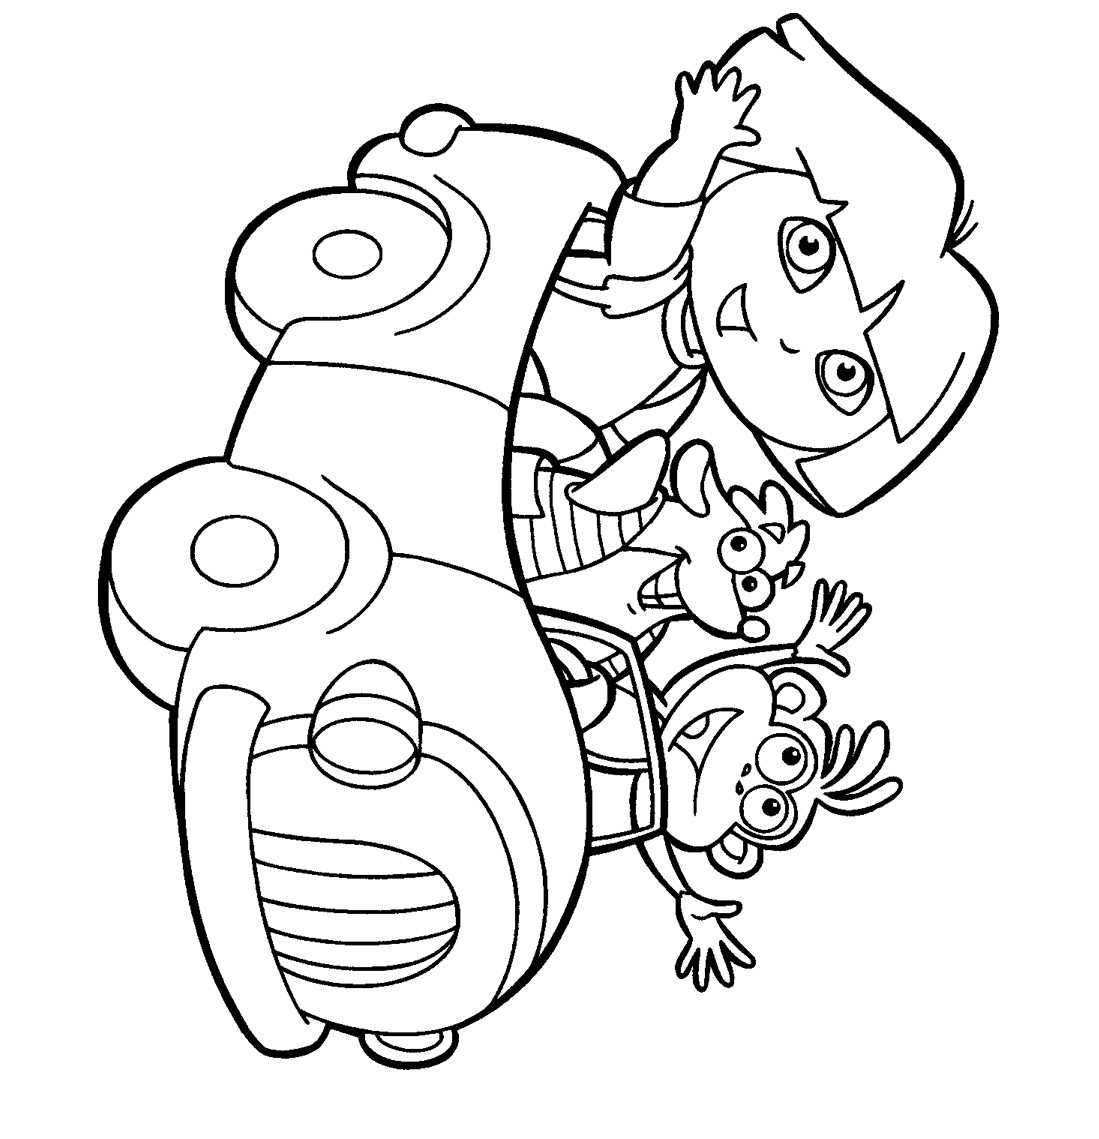 Coloring Pages For Toddlers Printable
 Printable coloring pages for kids